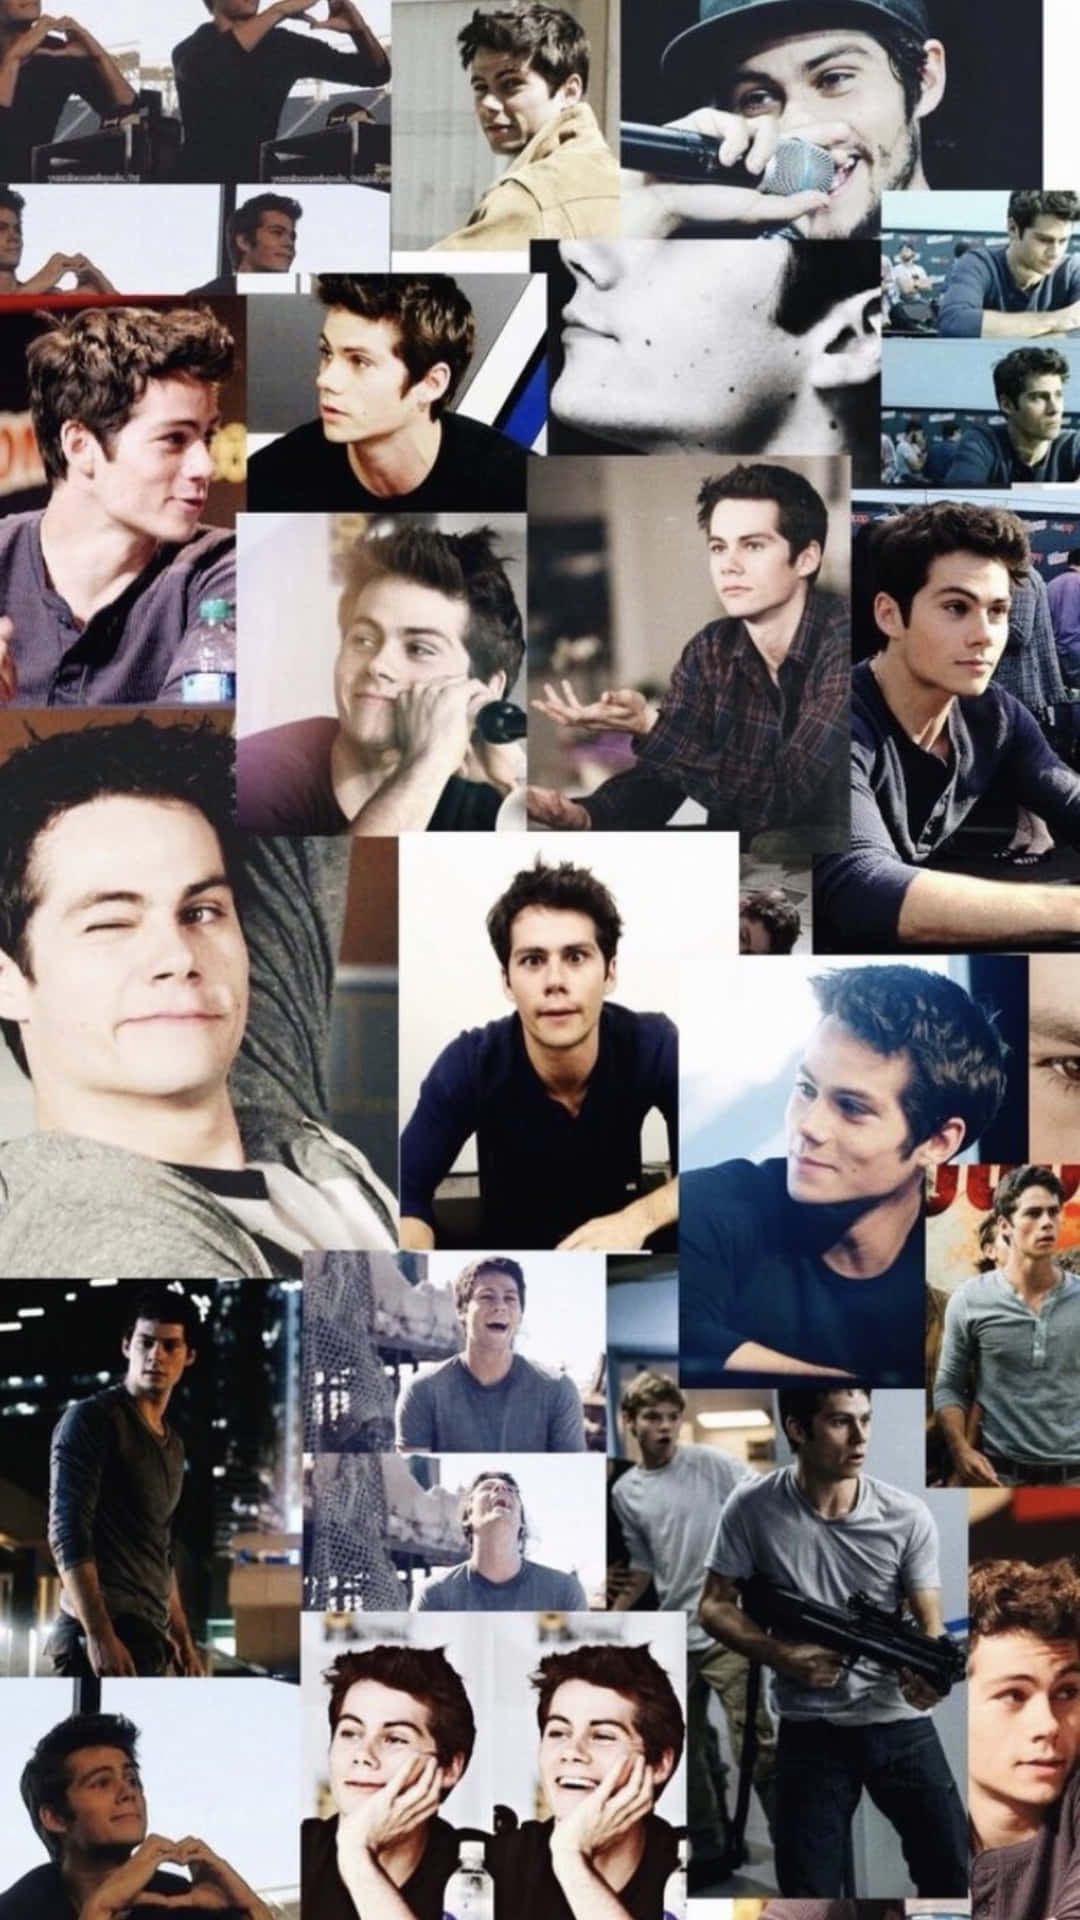 "Smile for the camera! Dylan Obrien doing what he does best". Wallpaper